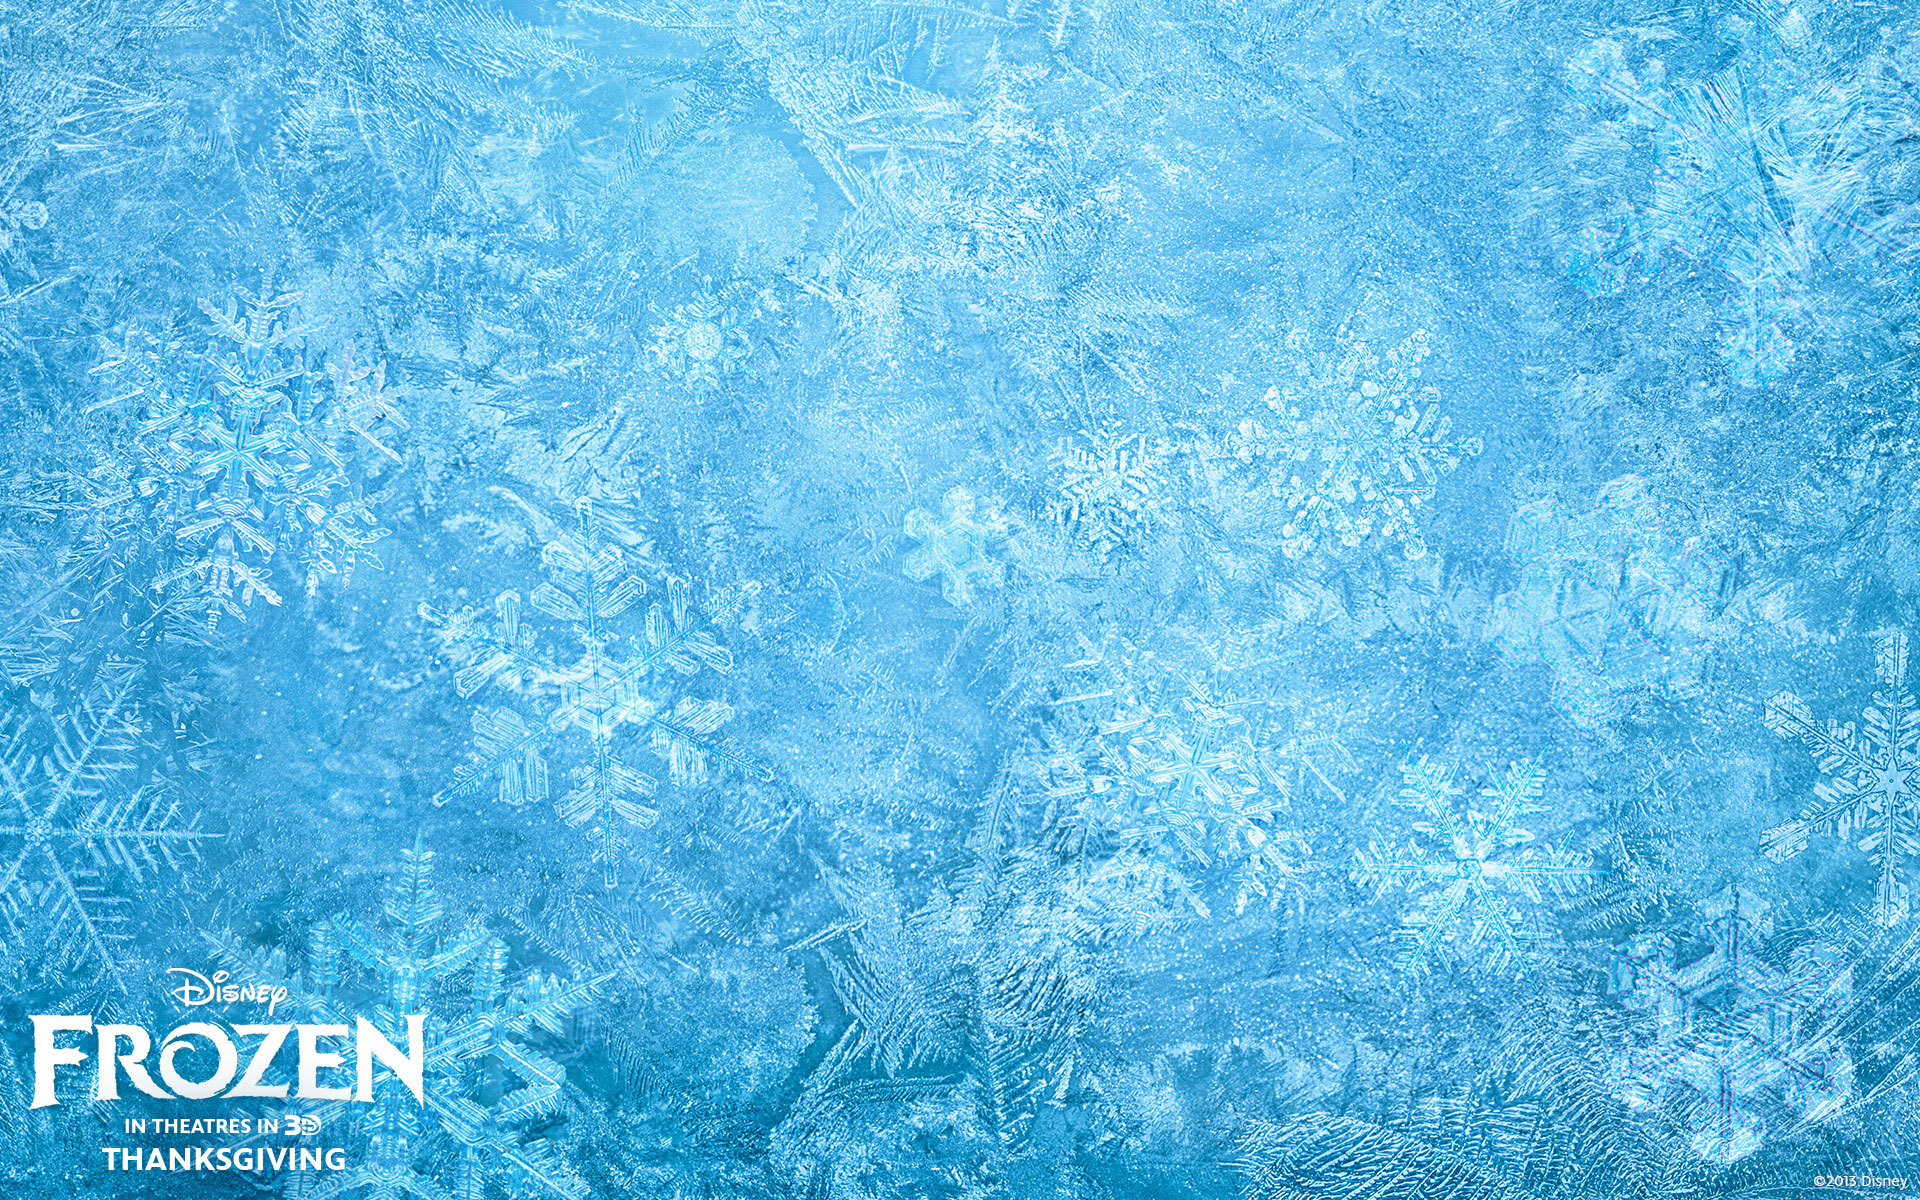 To Get The Frozen Ice Effect You Can Use Wallpaper Below Is